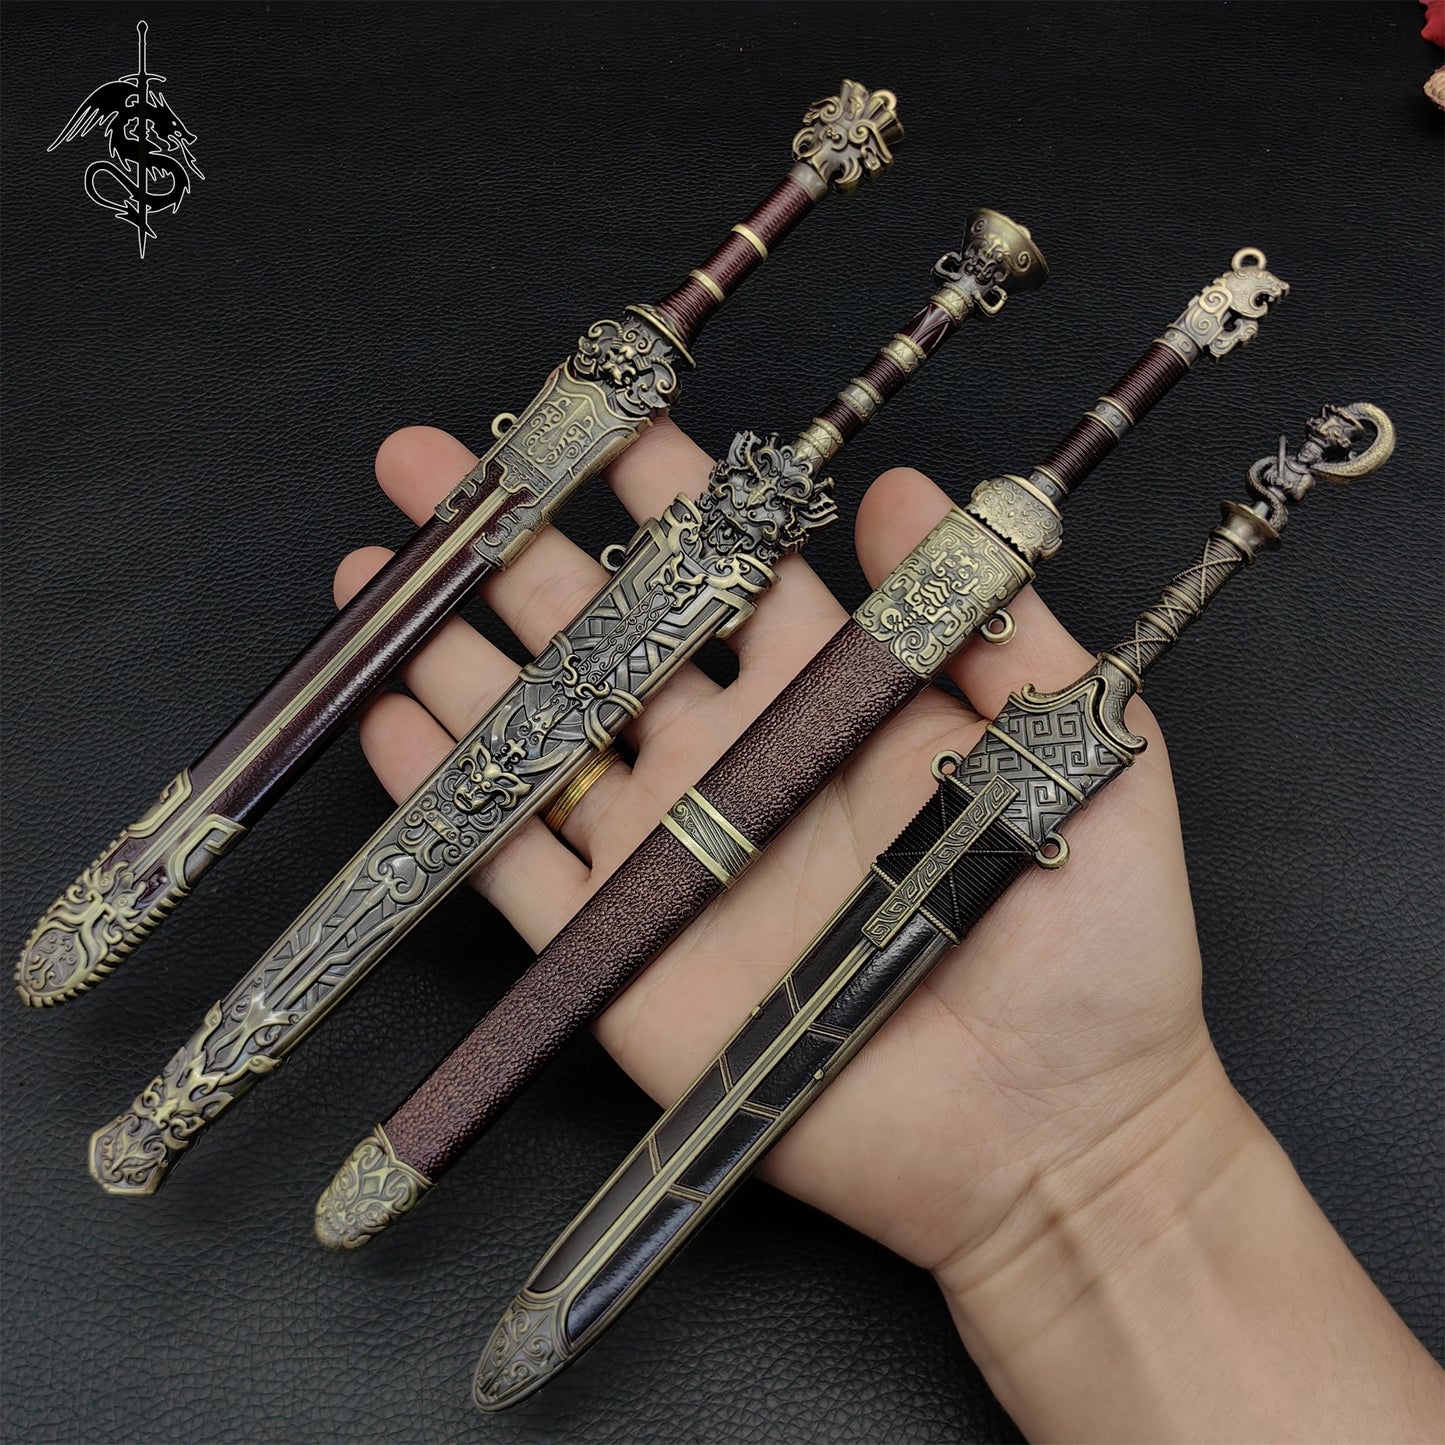 The Investiture of The Gods Metal Swords 4 In 1 Pack